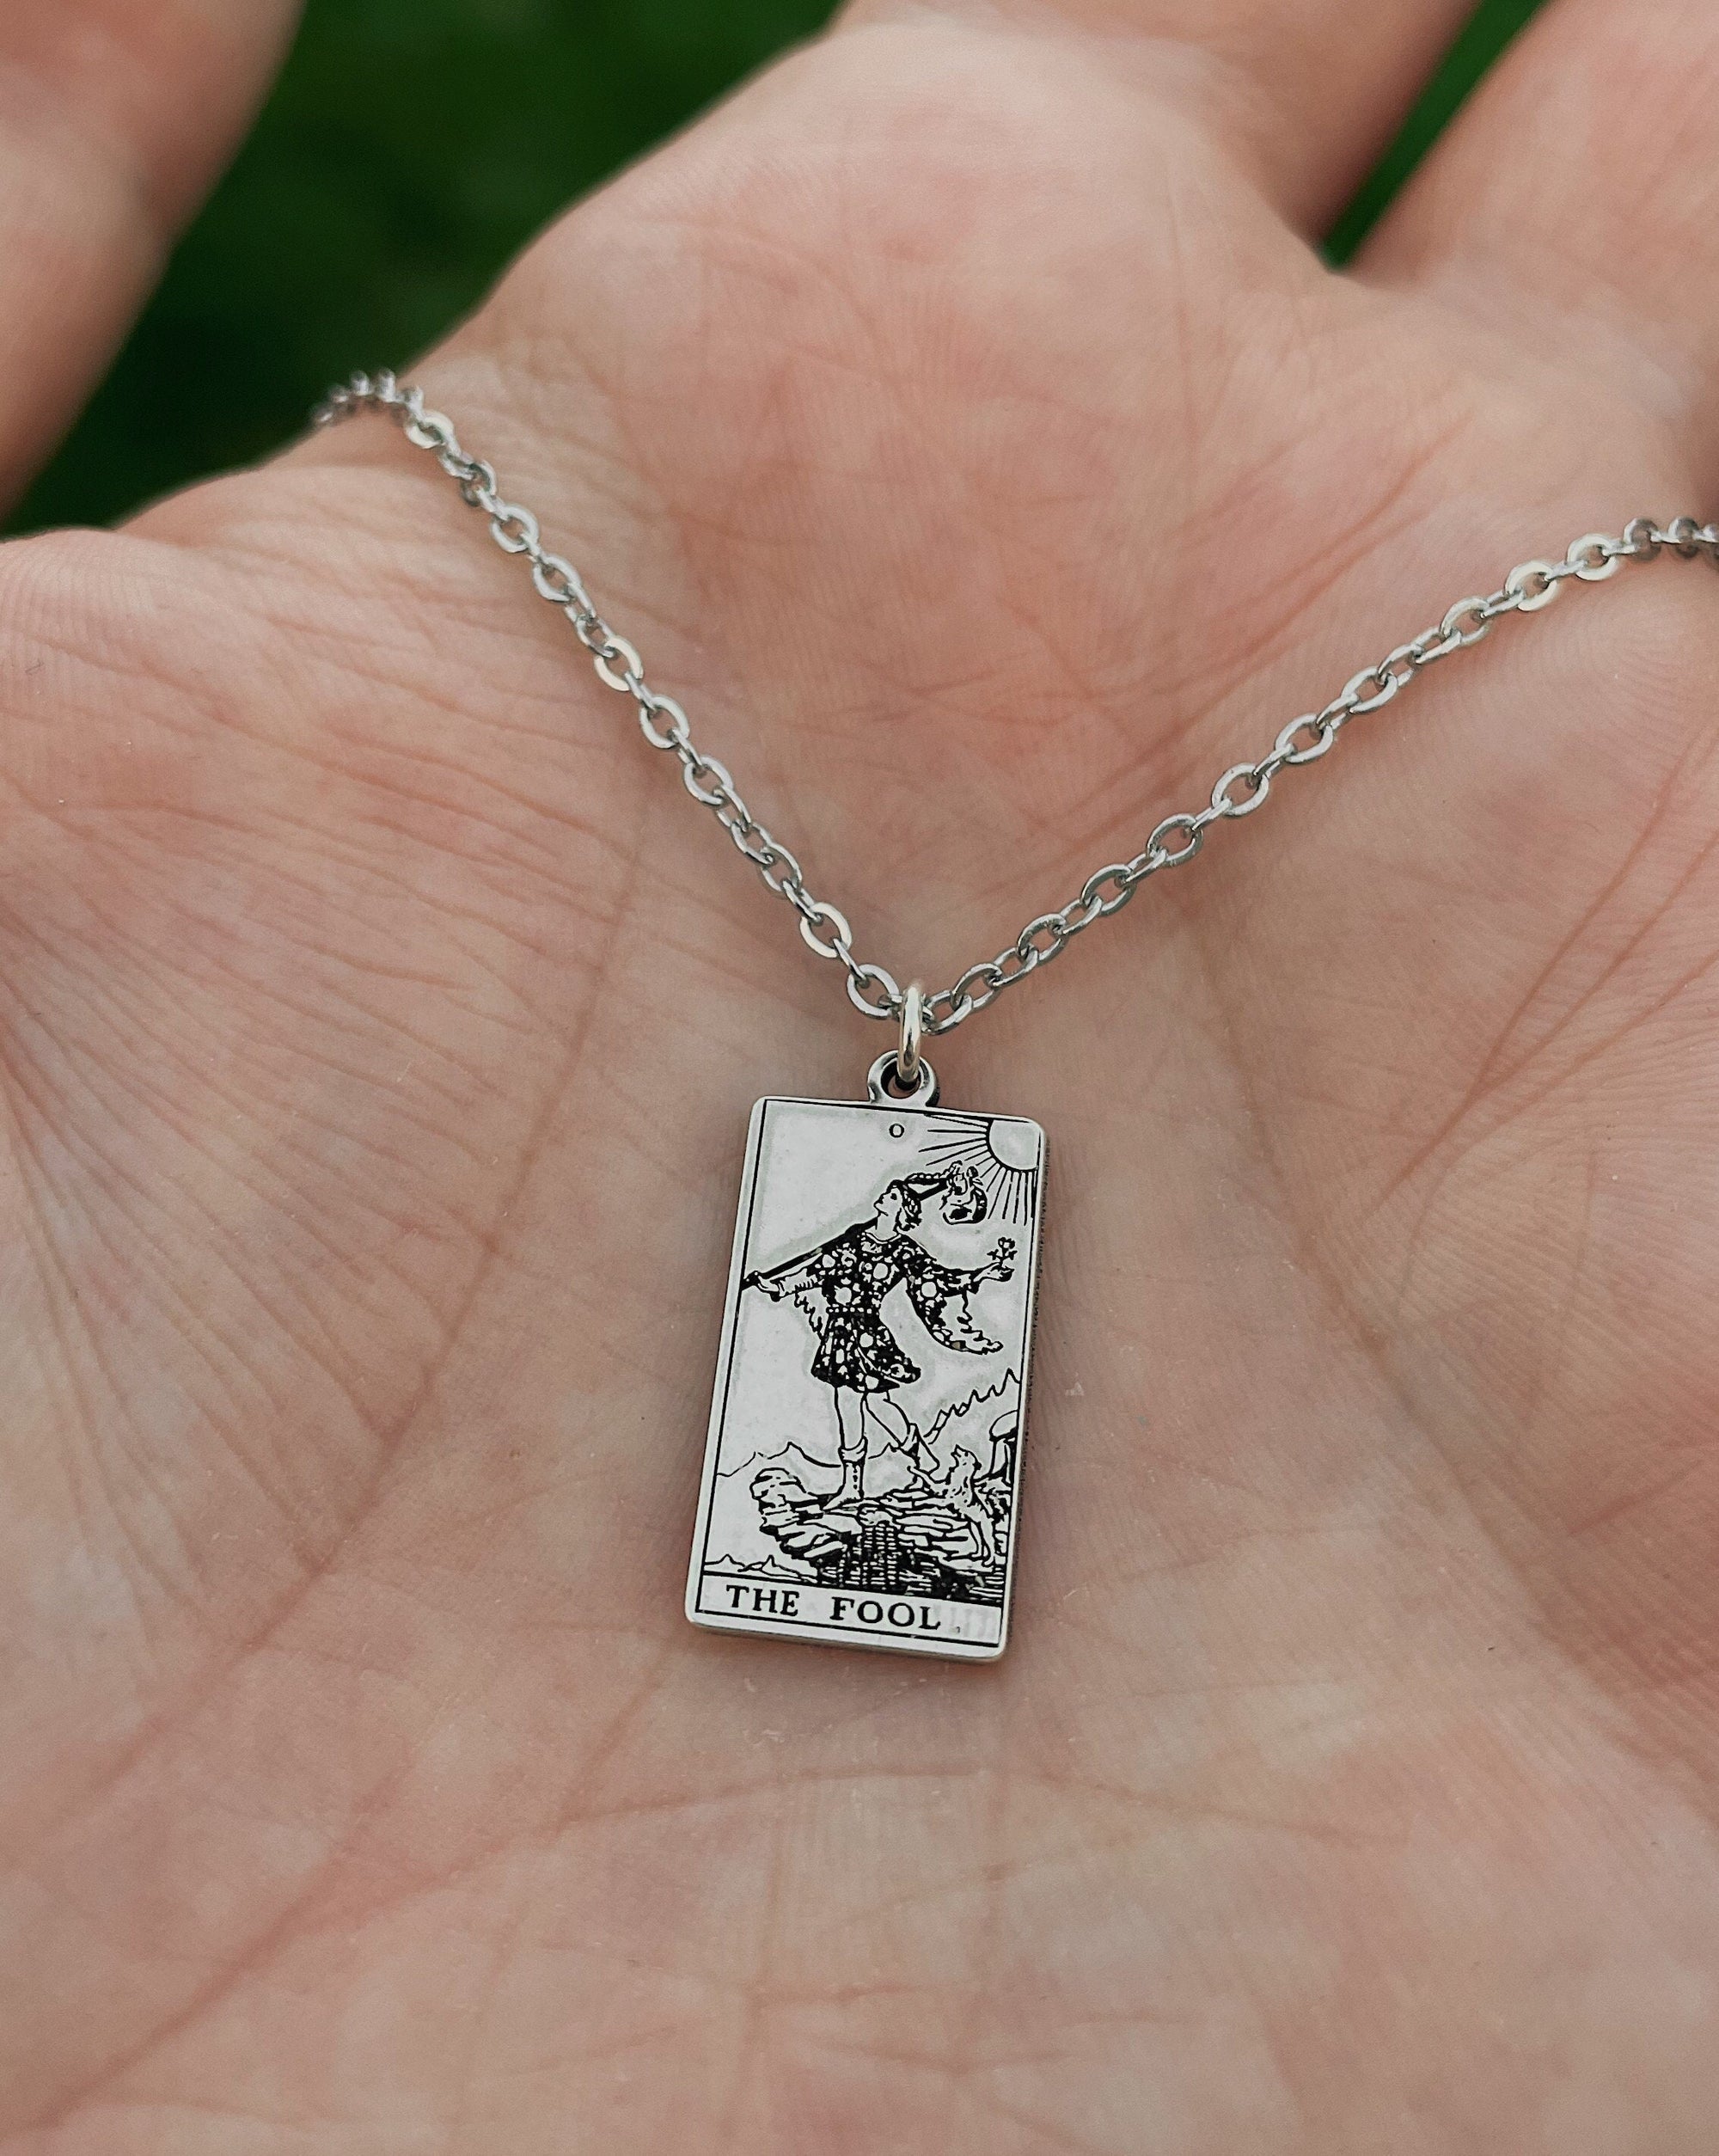 The Fool Tarot Card Necklace - Sterling Silver